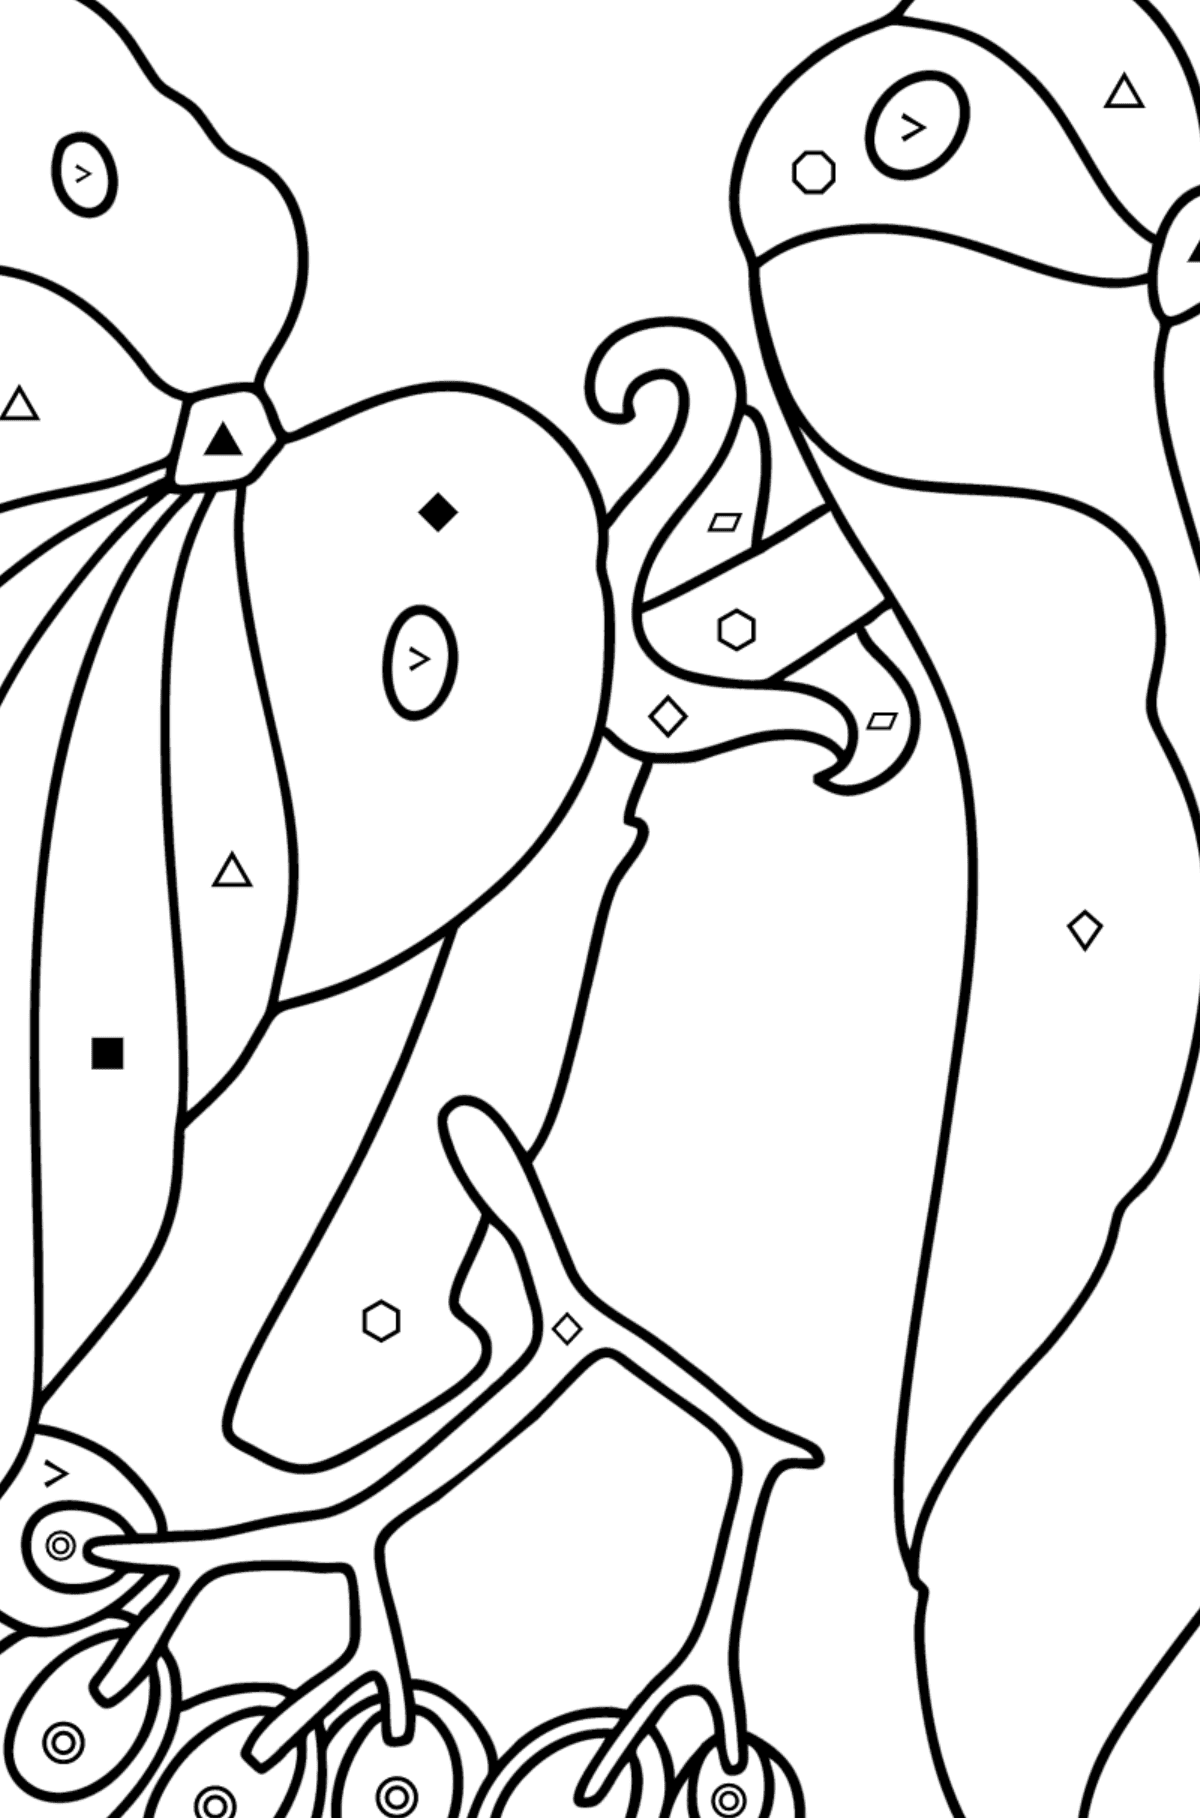 Begonia coloring page - Coloring by Symbols and Geometric Shapes for Kids